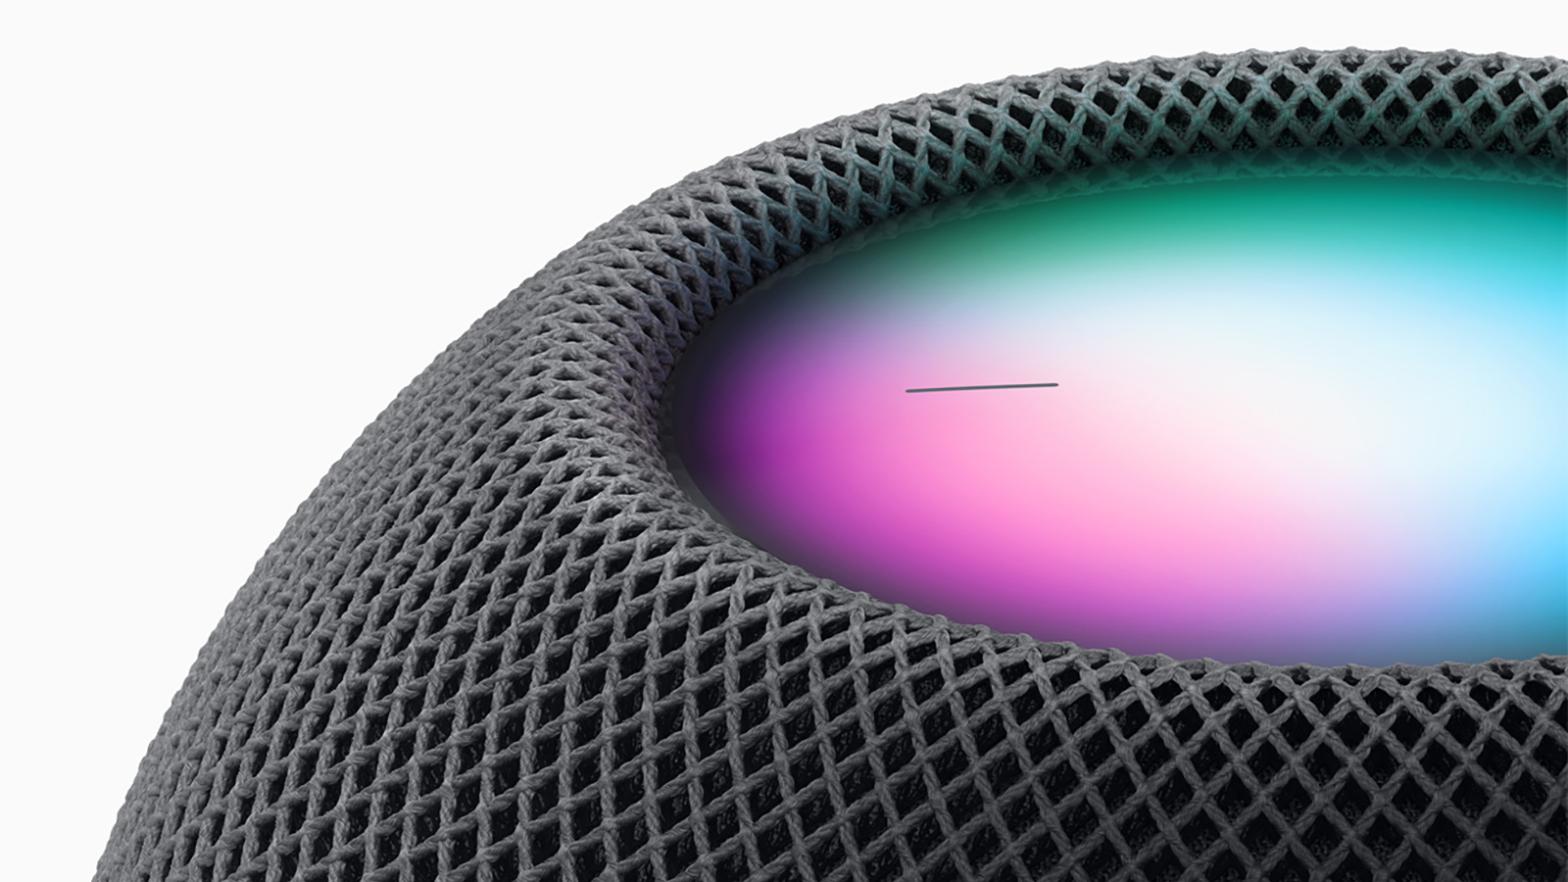 With the HomePod mini, Apple picks up the Thread. (Image: Apple)